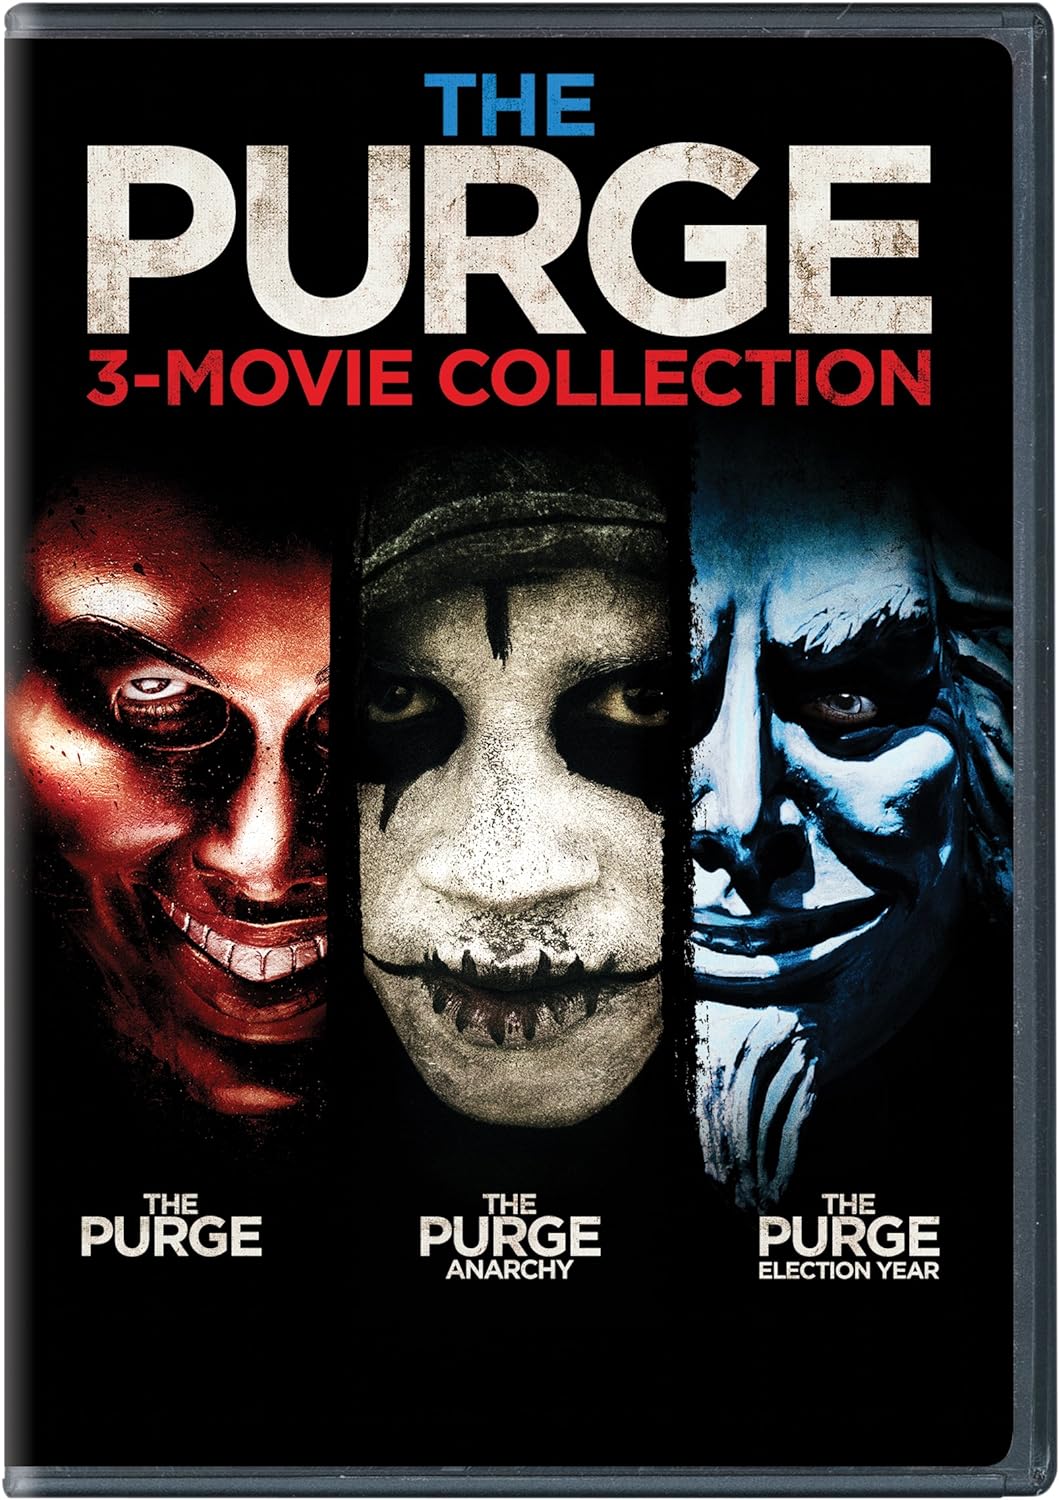 The Purge: 3-Movie Collection [DVD]